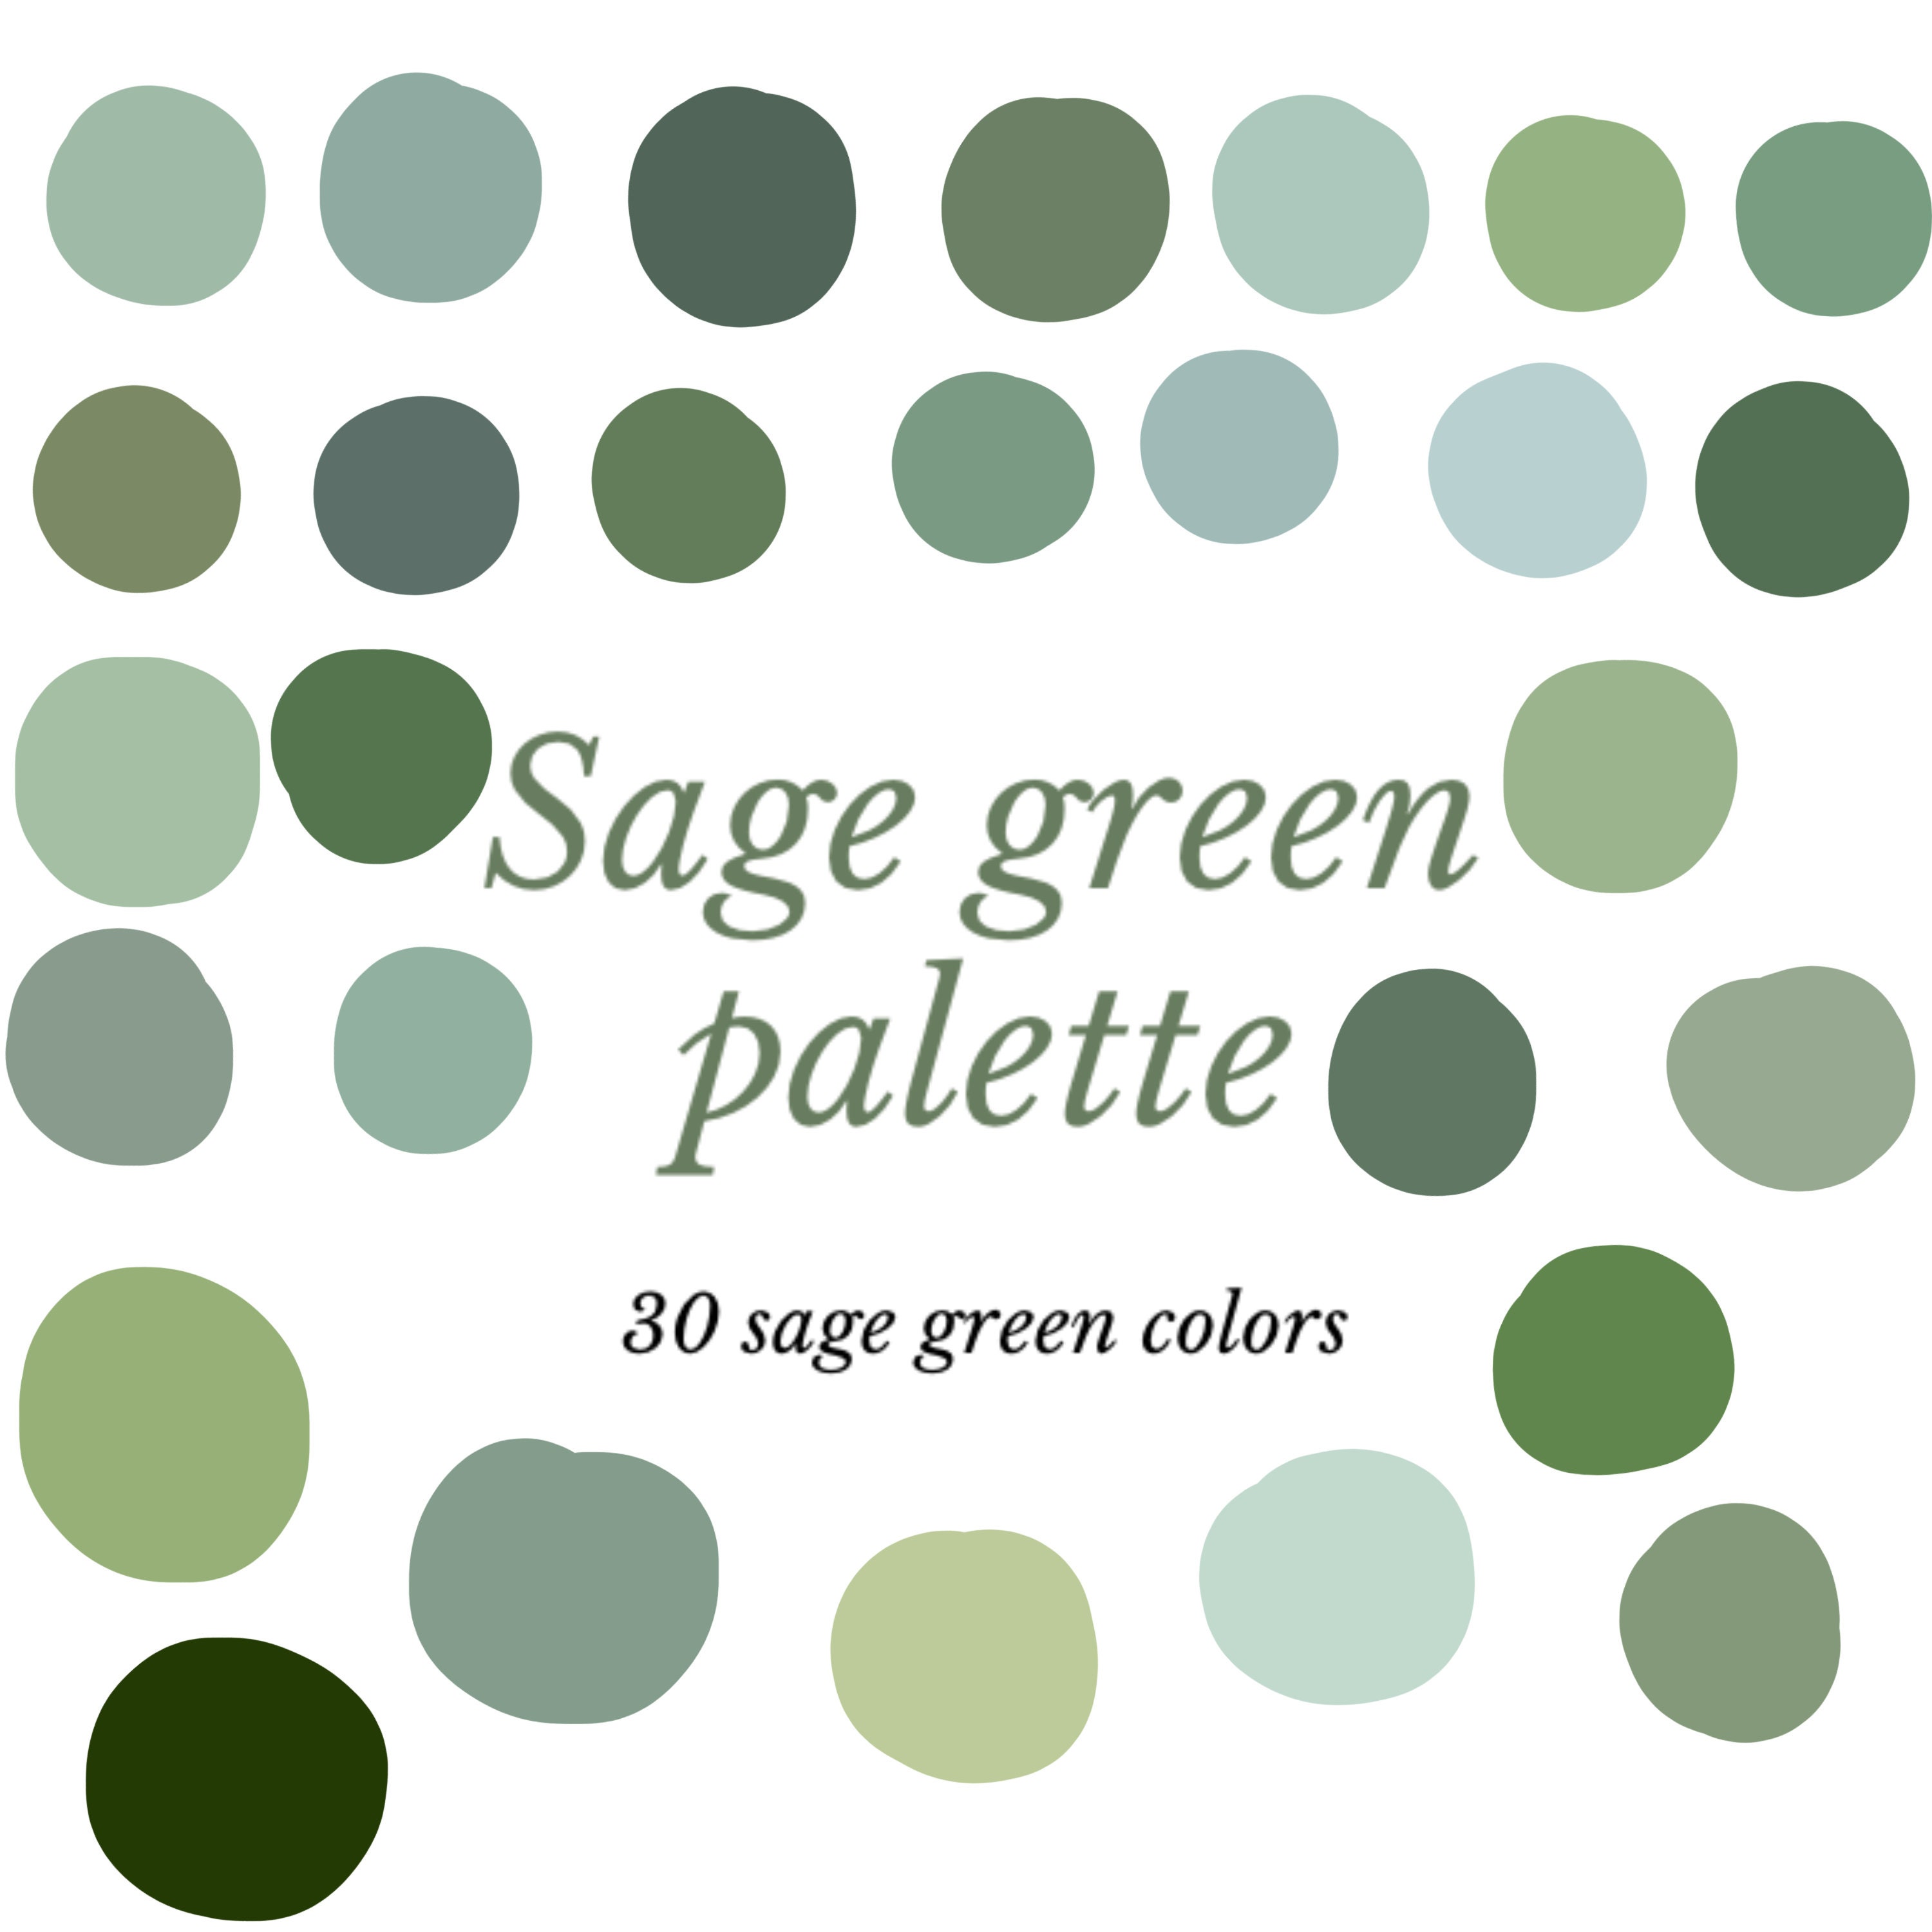 Looking to Buy Sage Green Balloons This Year. Here are 10 Key Things to Know Before You Buy